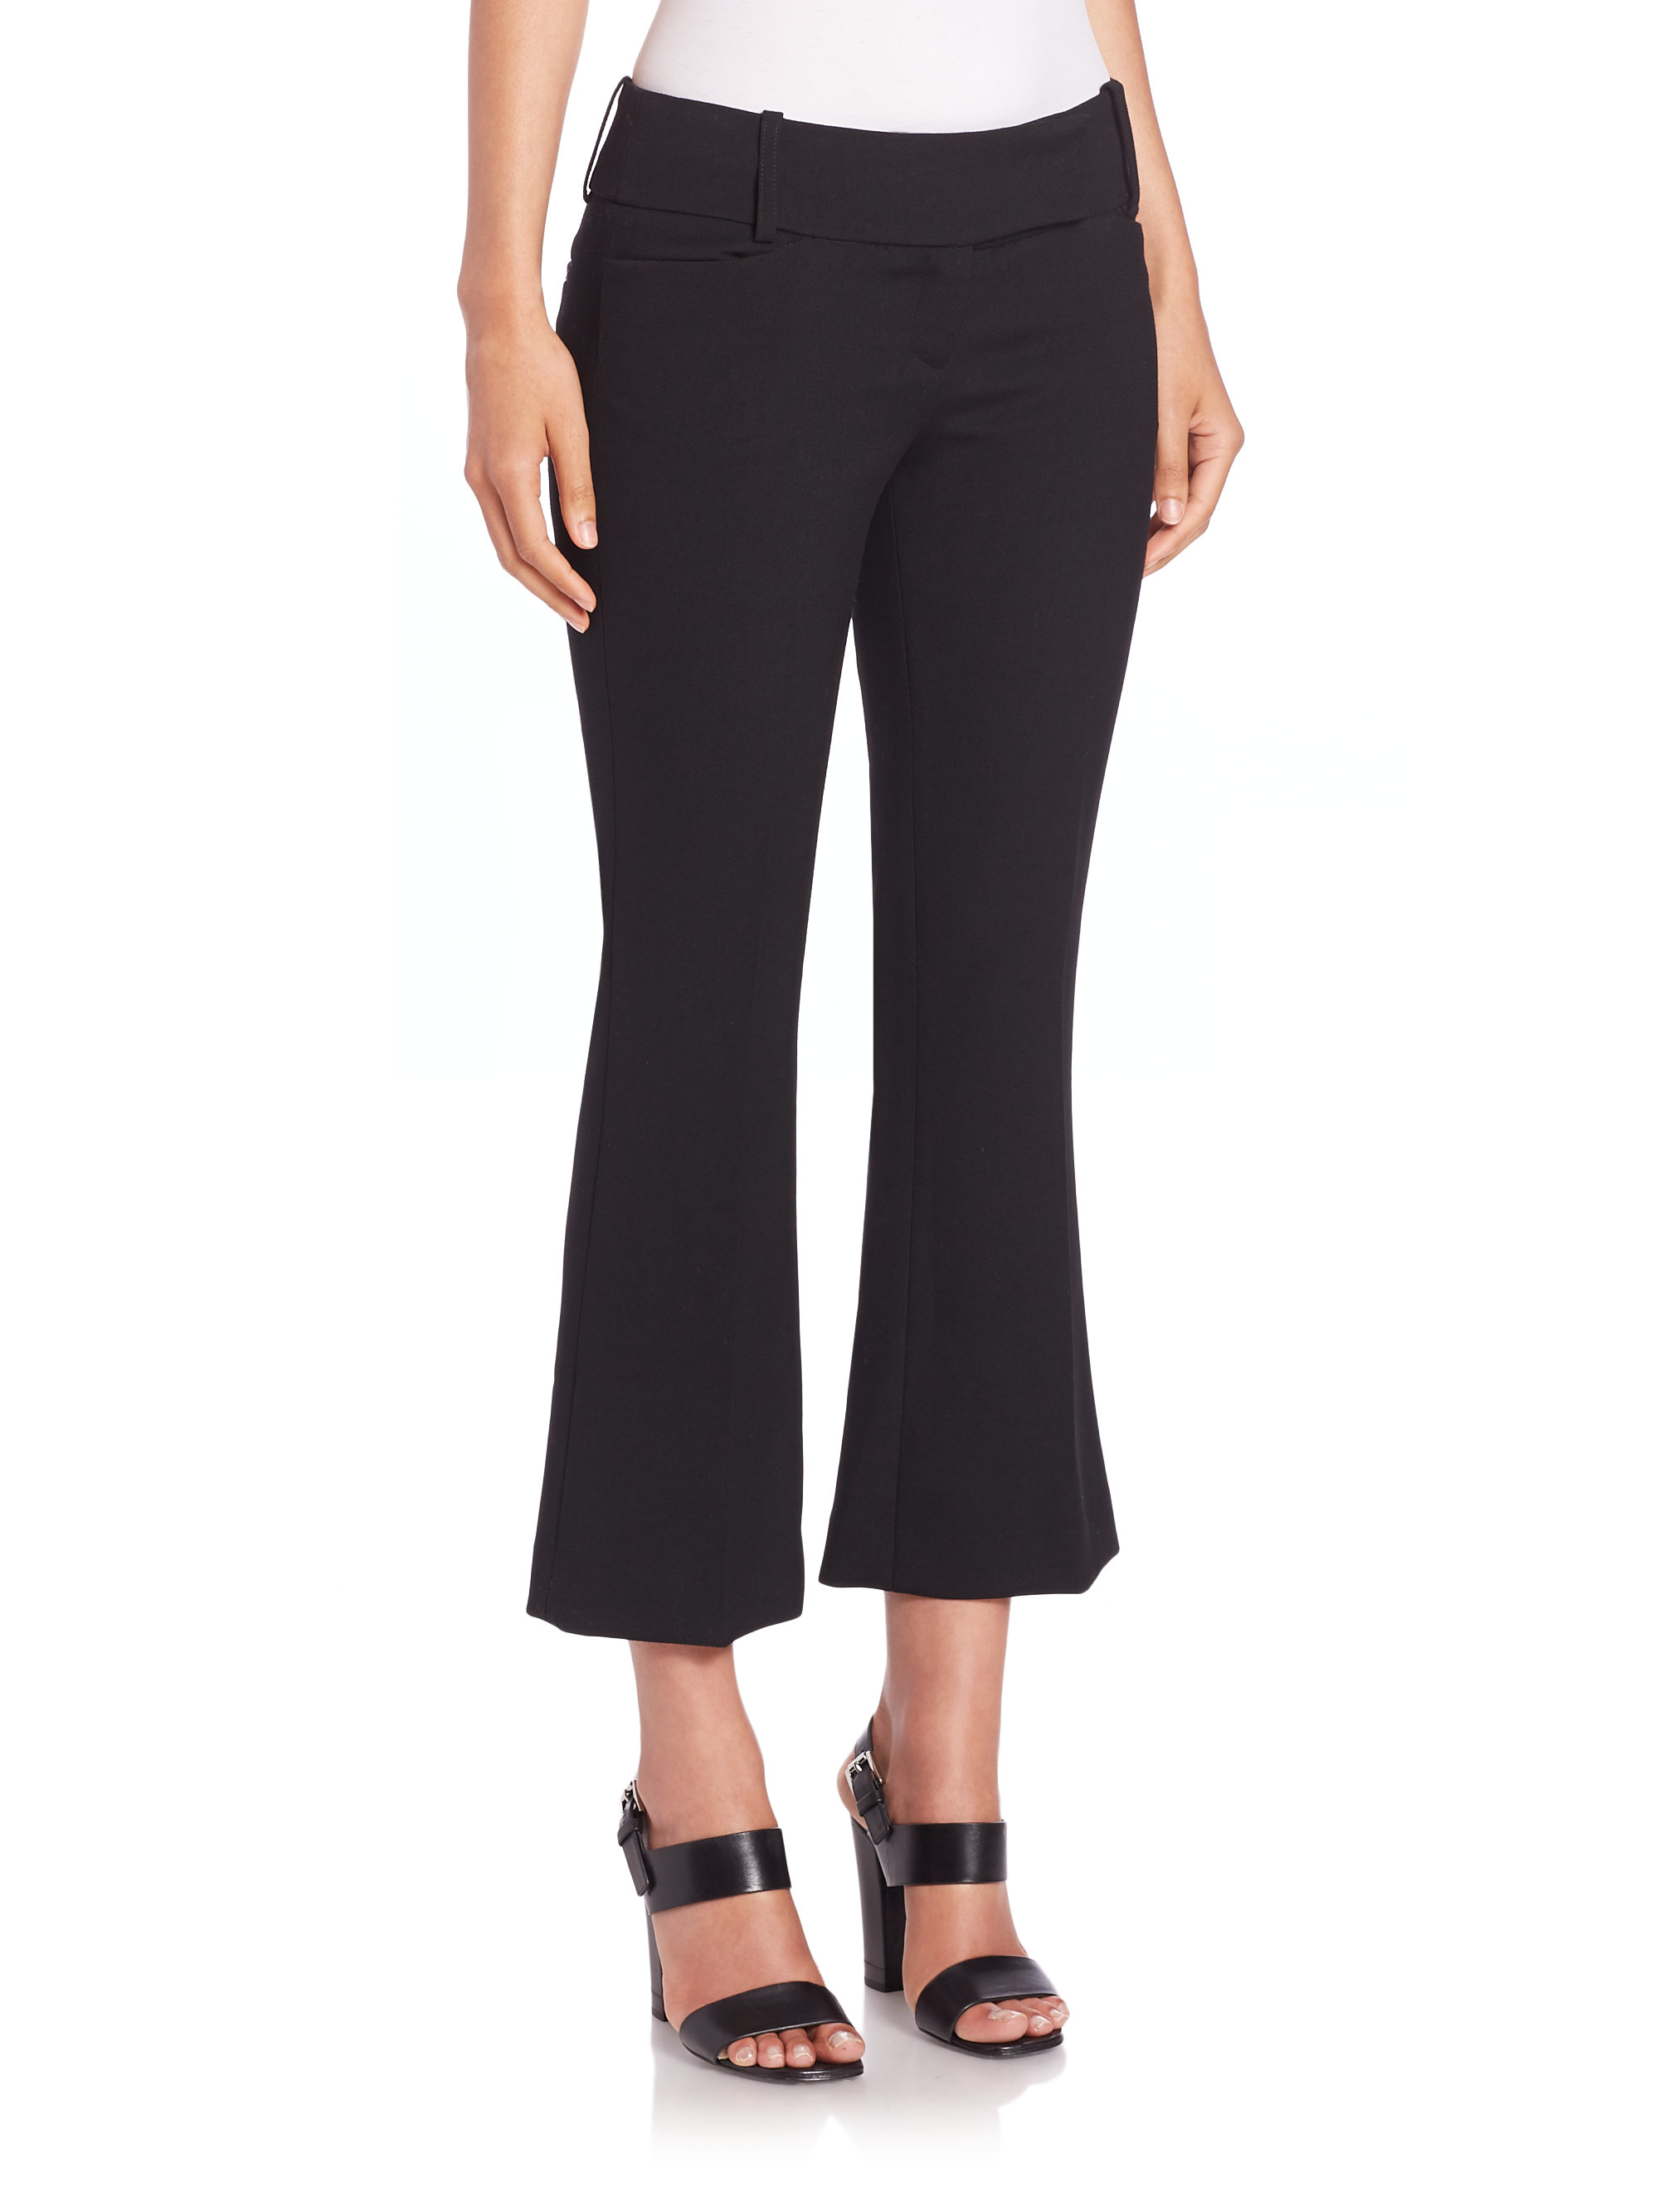 Michael kors Cropped Cashmere-blend Flared Pants in Black | Lyst